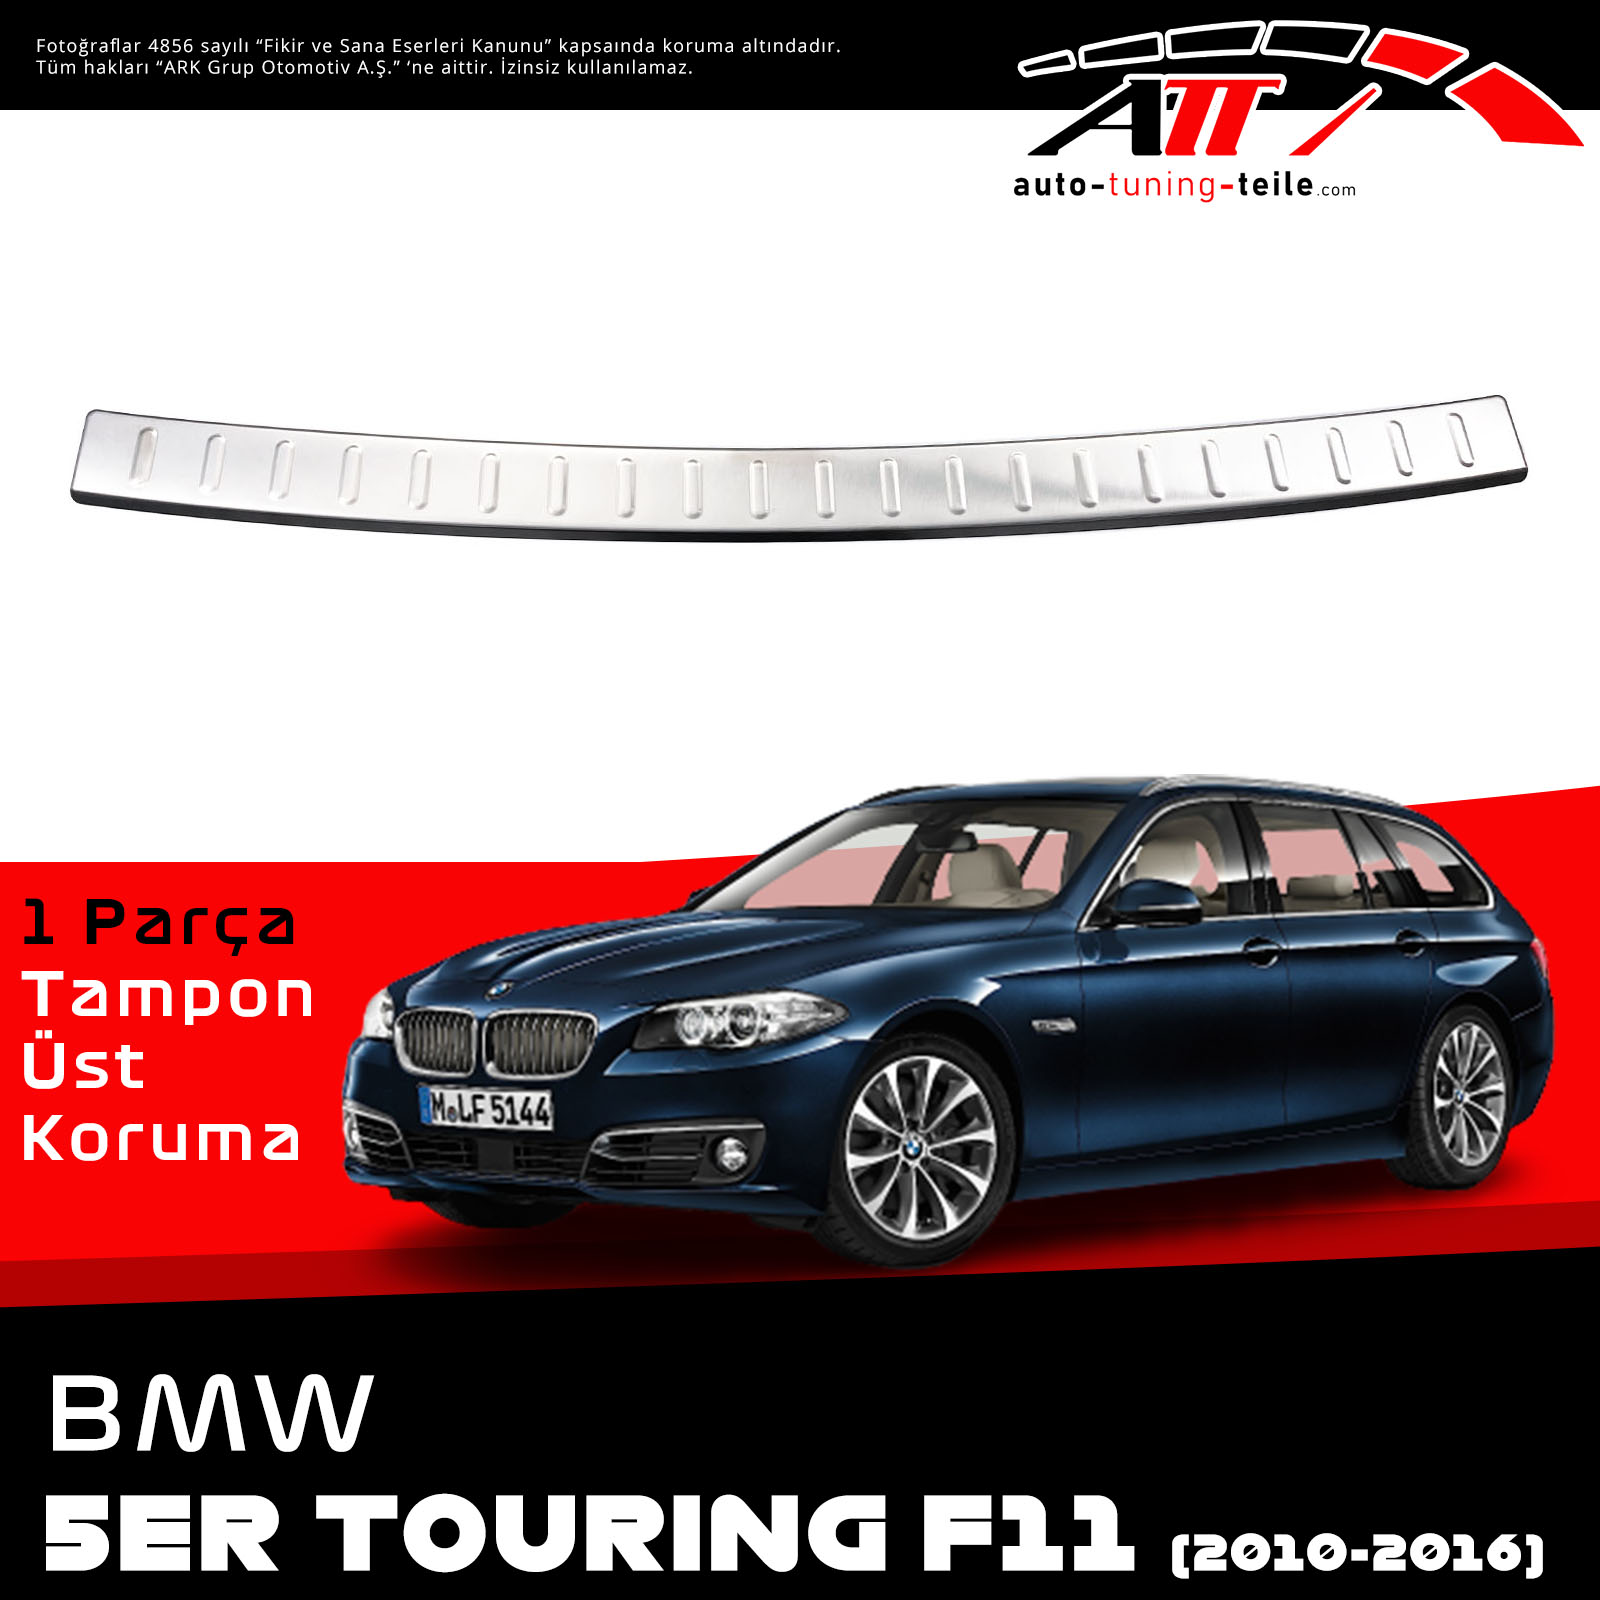 REAR BUMPER SILL COVER S. STEEL BMW 5-ER TOURING F11-G31 TOURING 2010-2016 CHROM